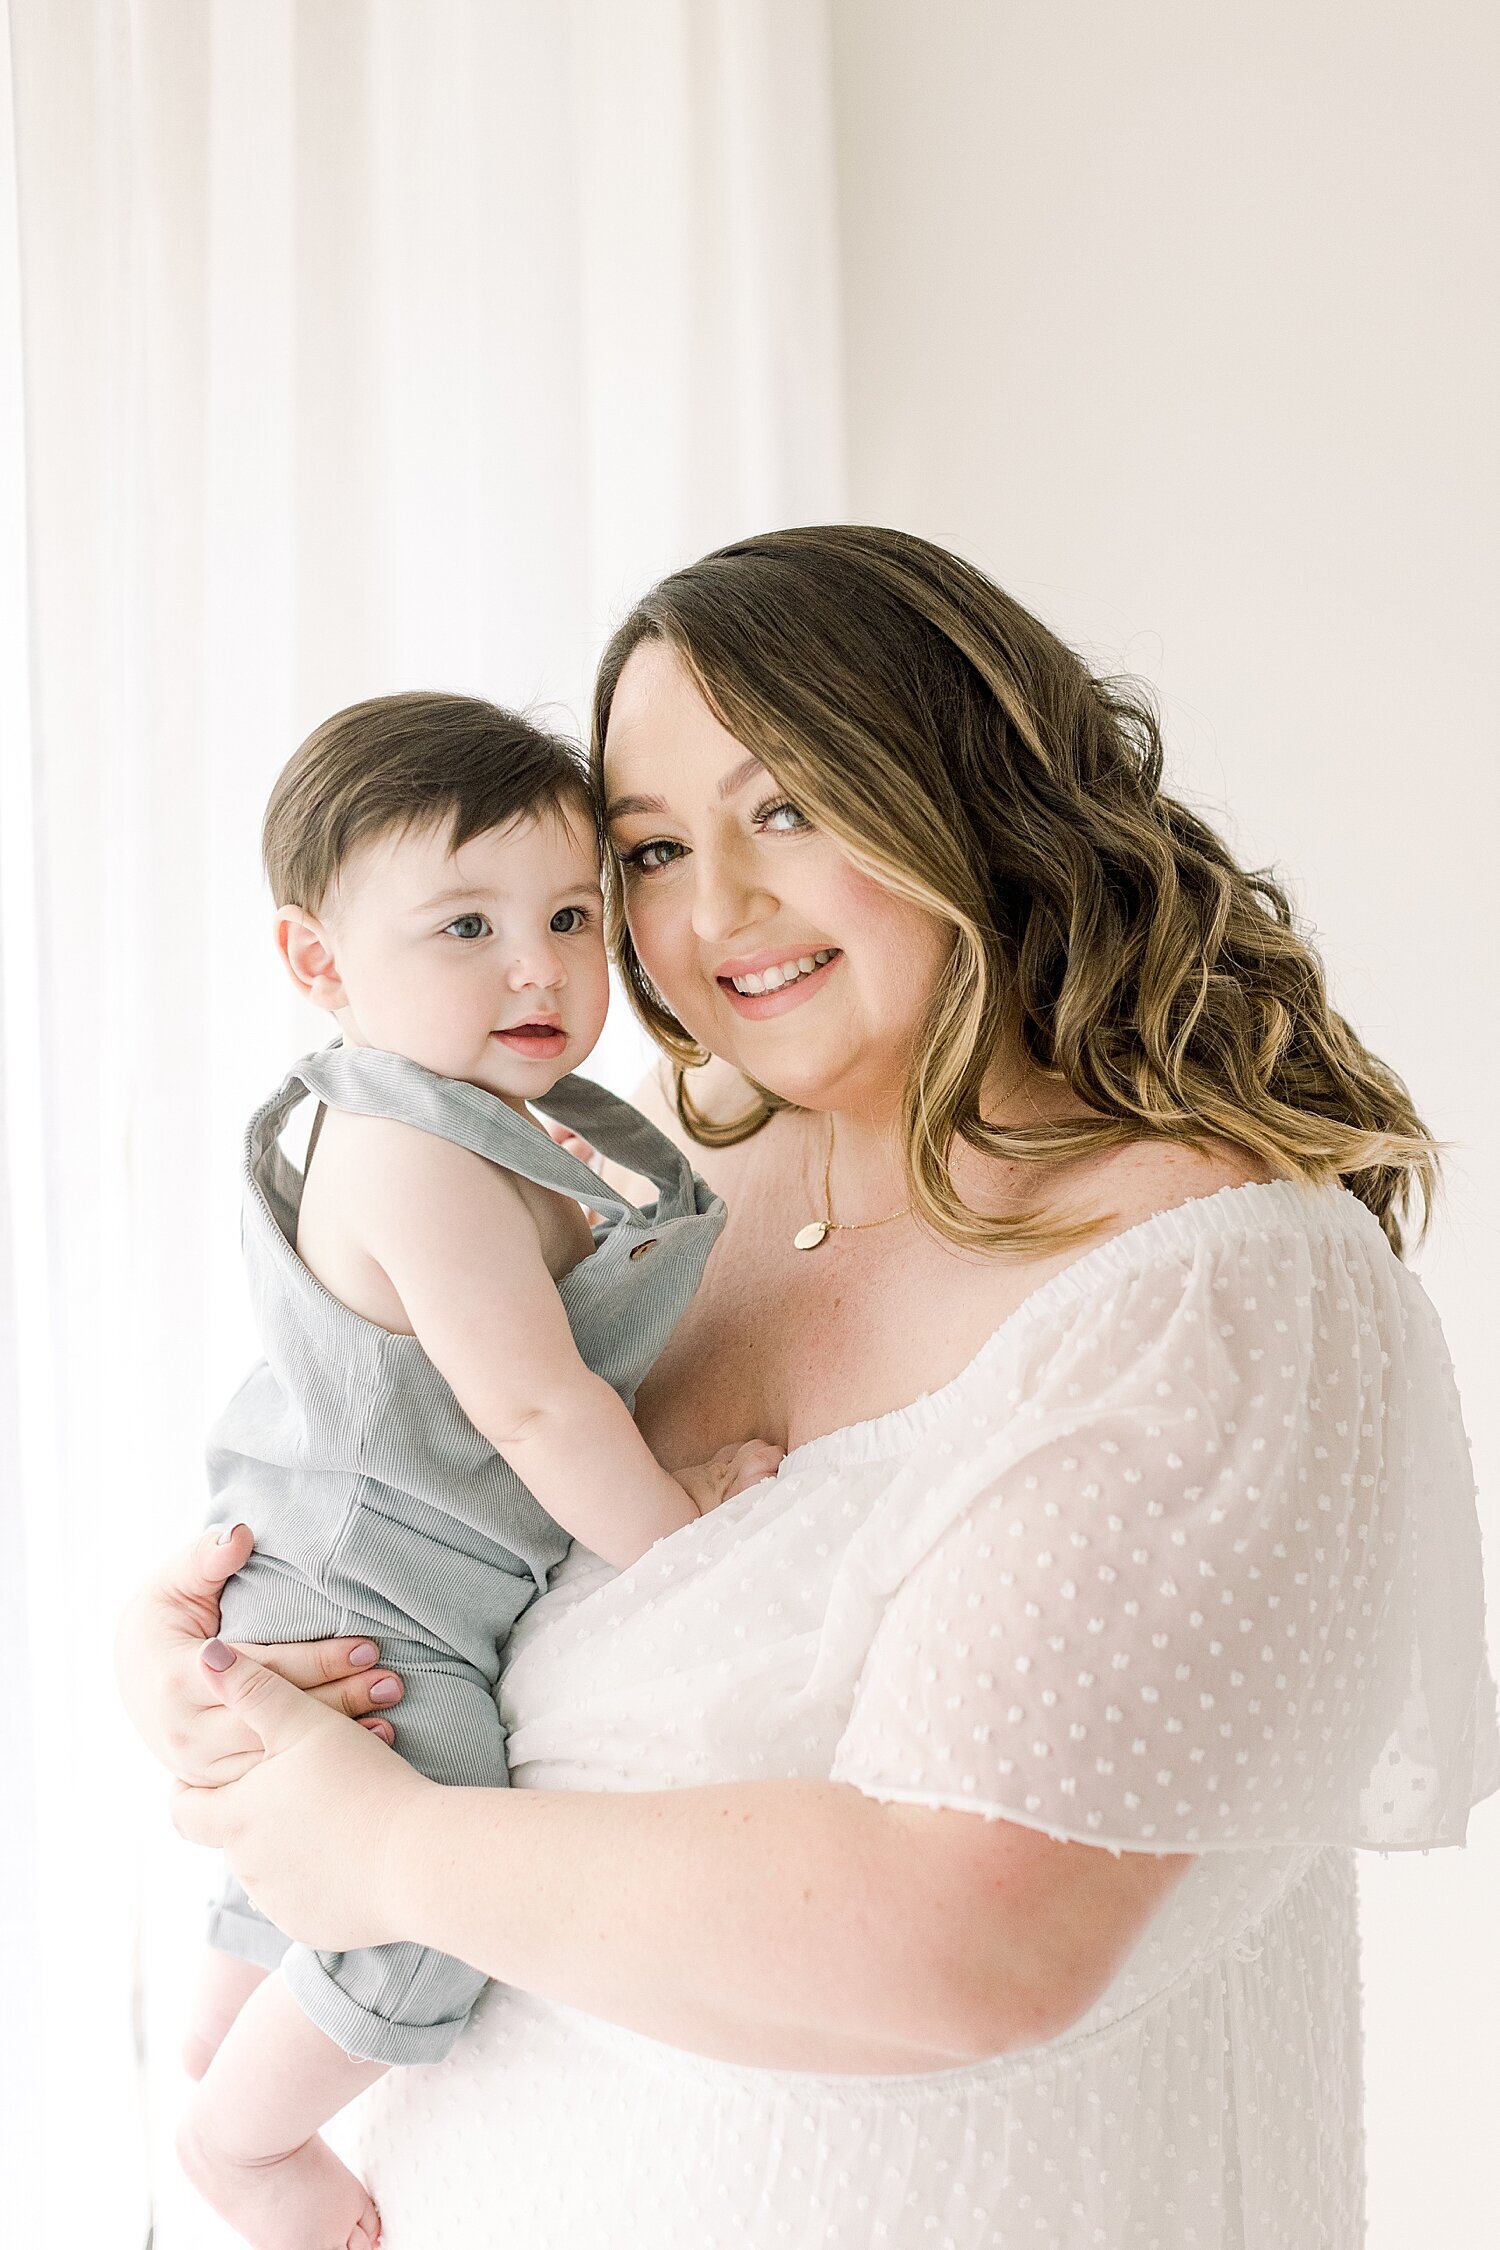 Mother-son photo taken in studio by Ambre Williams Photography.